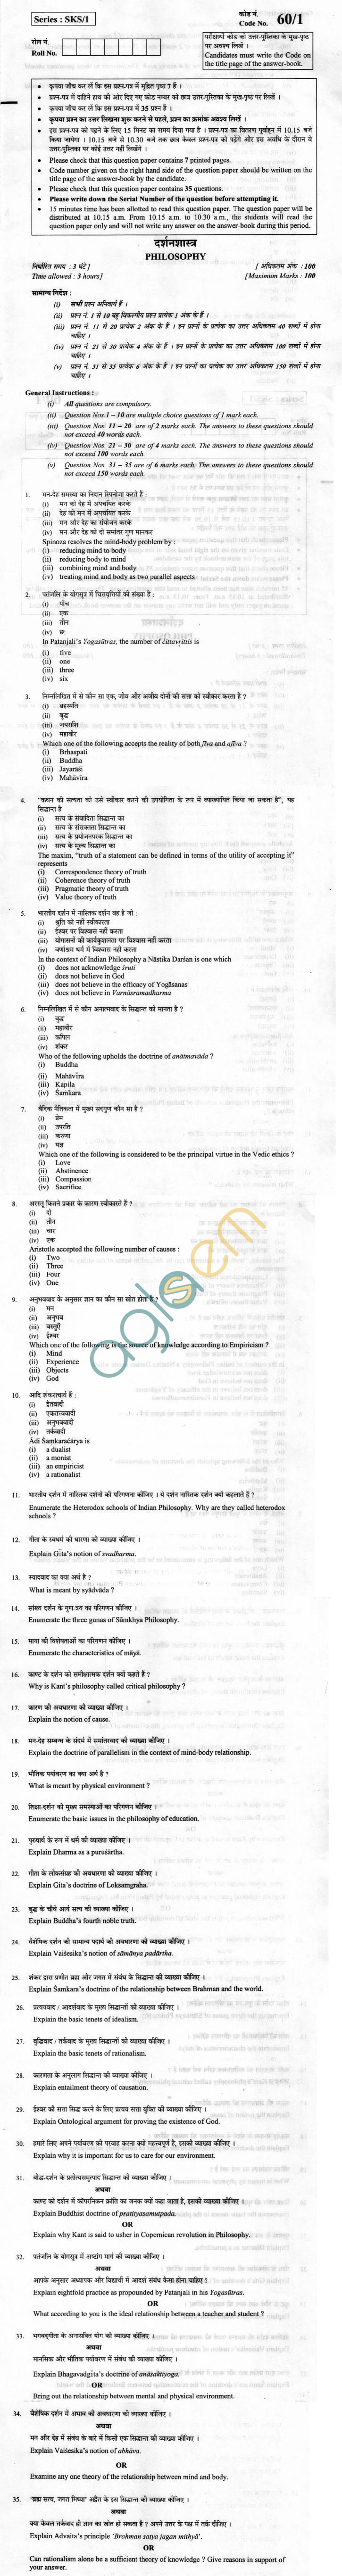 CBSE Board Exam 2013 Class XII Question Paper - Philosophy